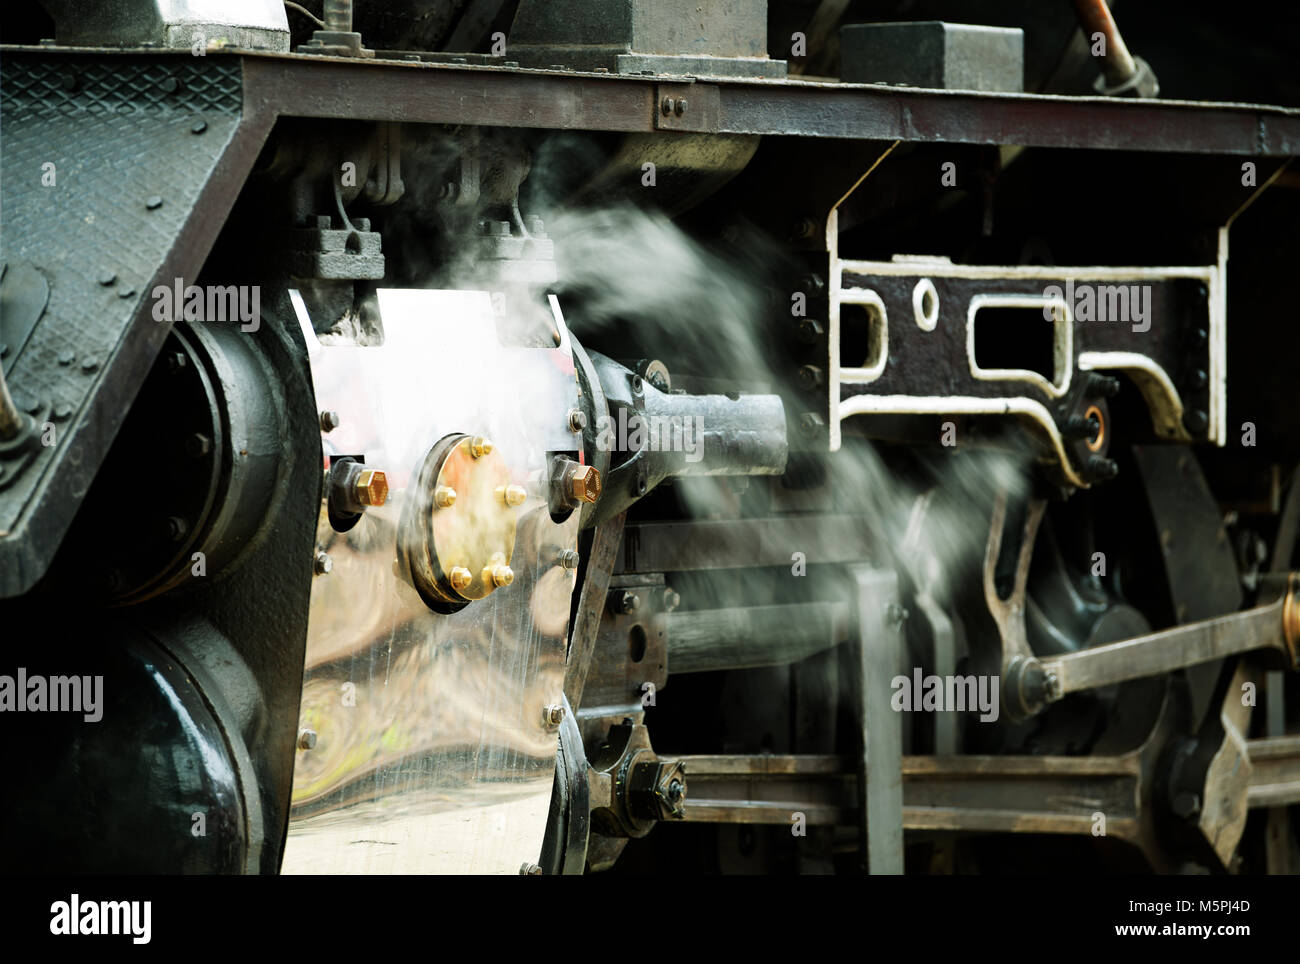 Steam escaping from release valves on the drive train of a refurbished vintage steam locomotive Stock Photo